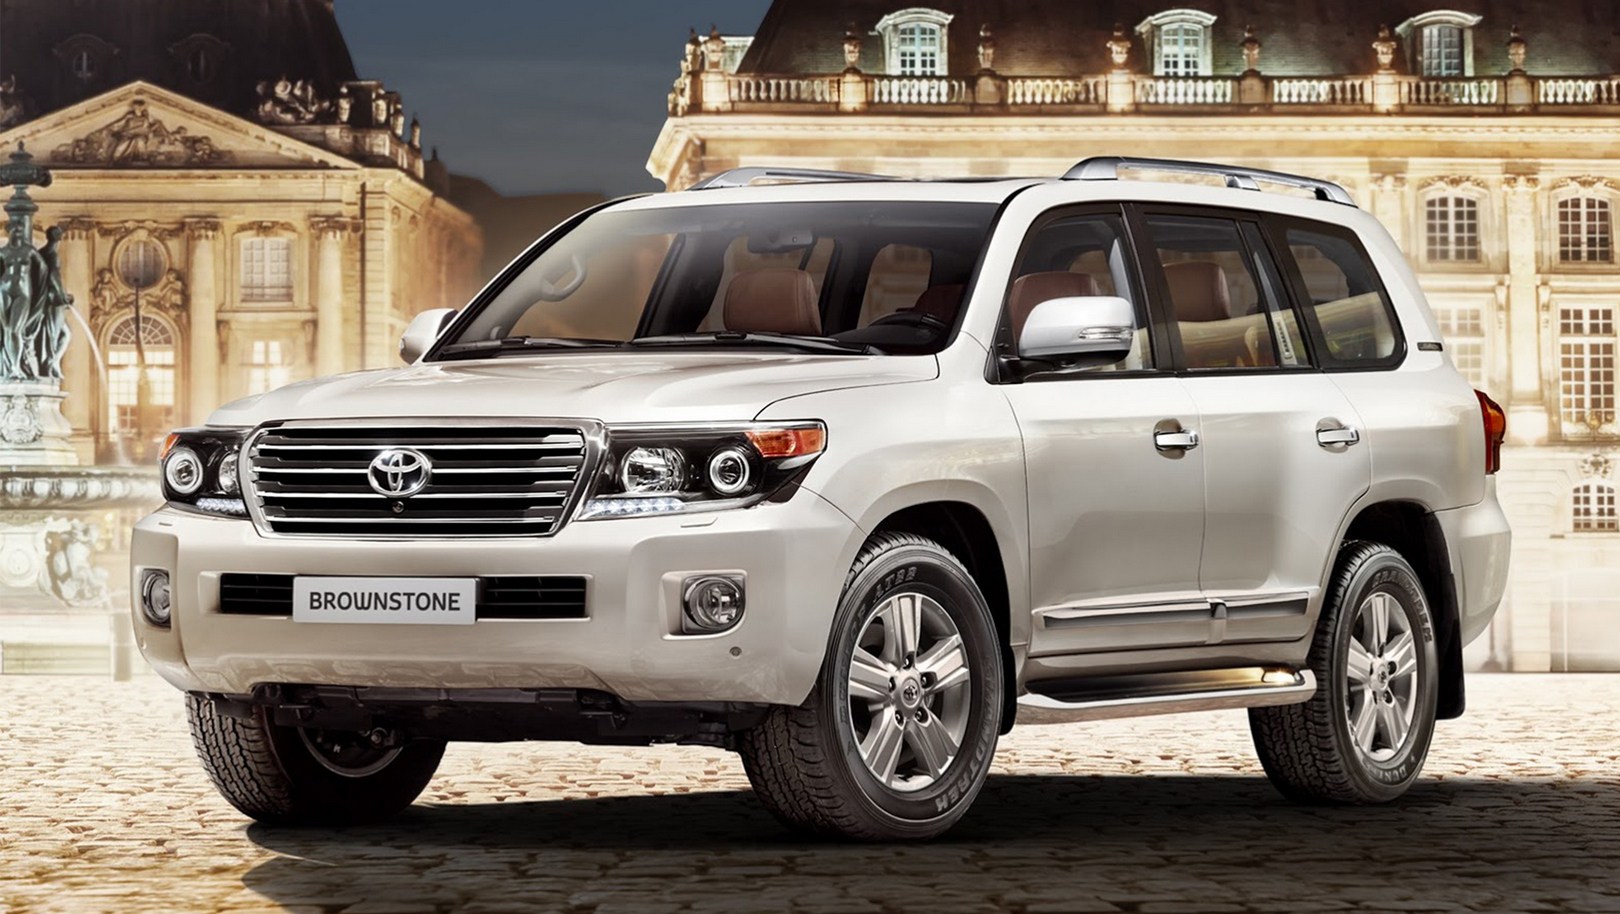 2020 Toyota Land Cruiser Design, Release Date And Price